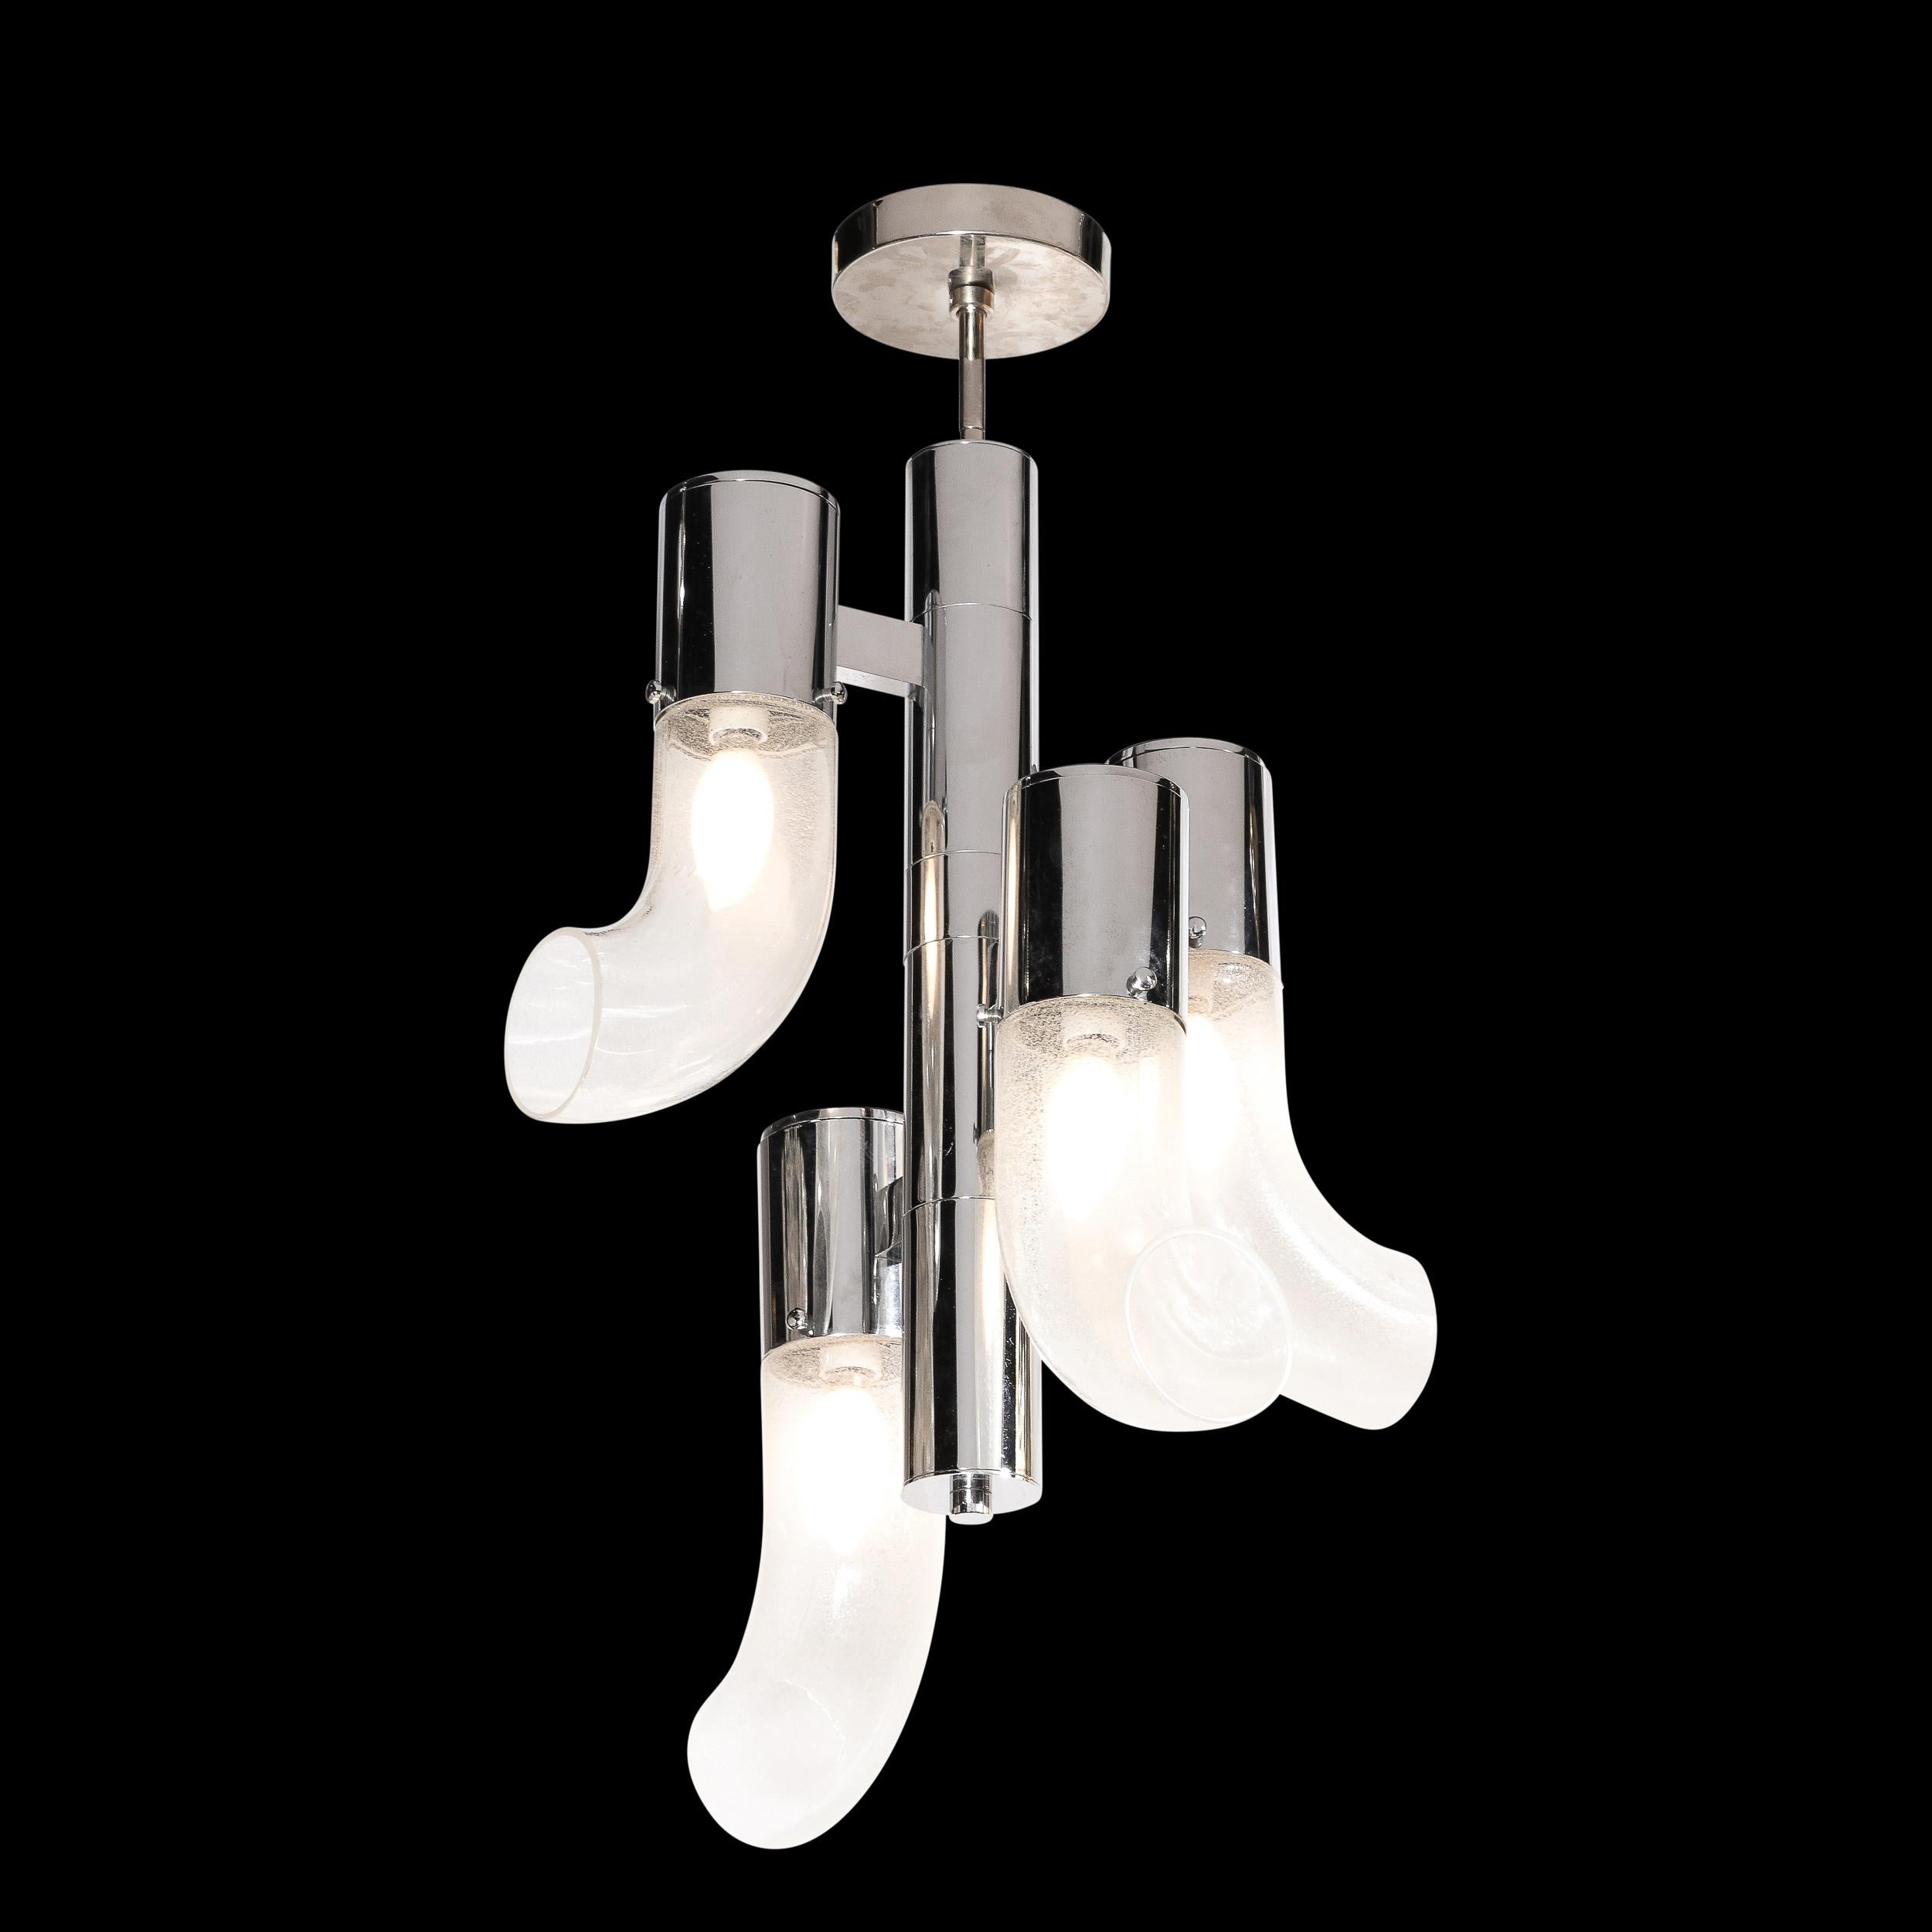 This iconic and graphic Mid-Century Modern chandelier was realized by the legendary designer Carlo Nason for Mazzega in Murano, Italy- the island off the coast of Venice renowned for centuries for its superlative glass production- circa 1970. It